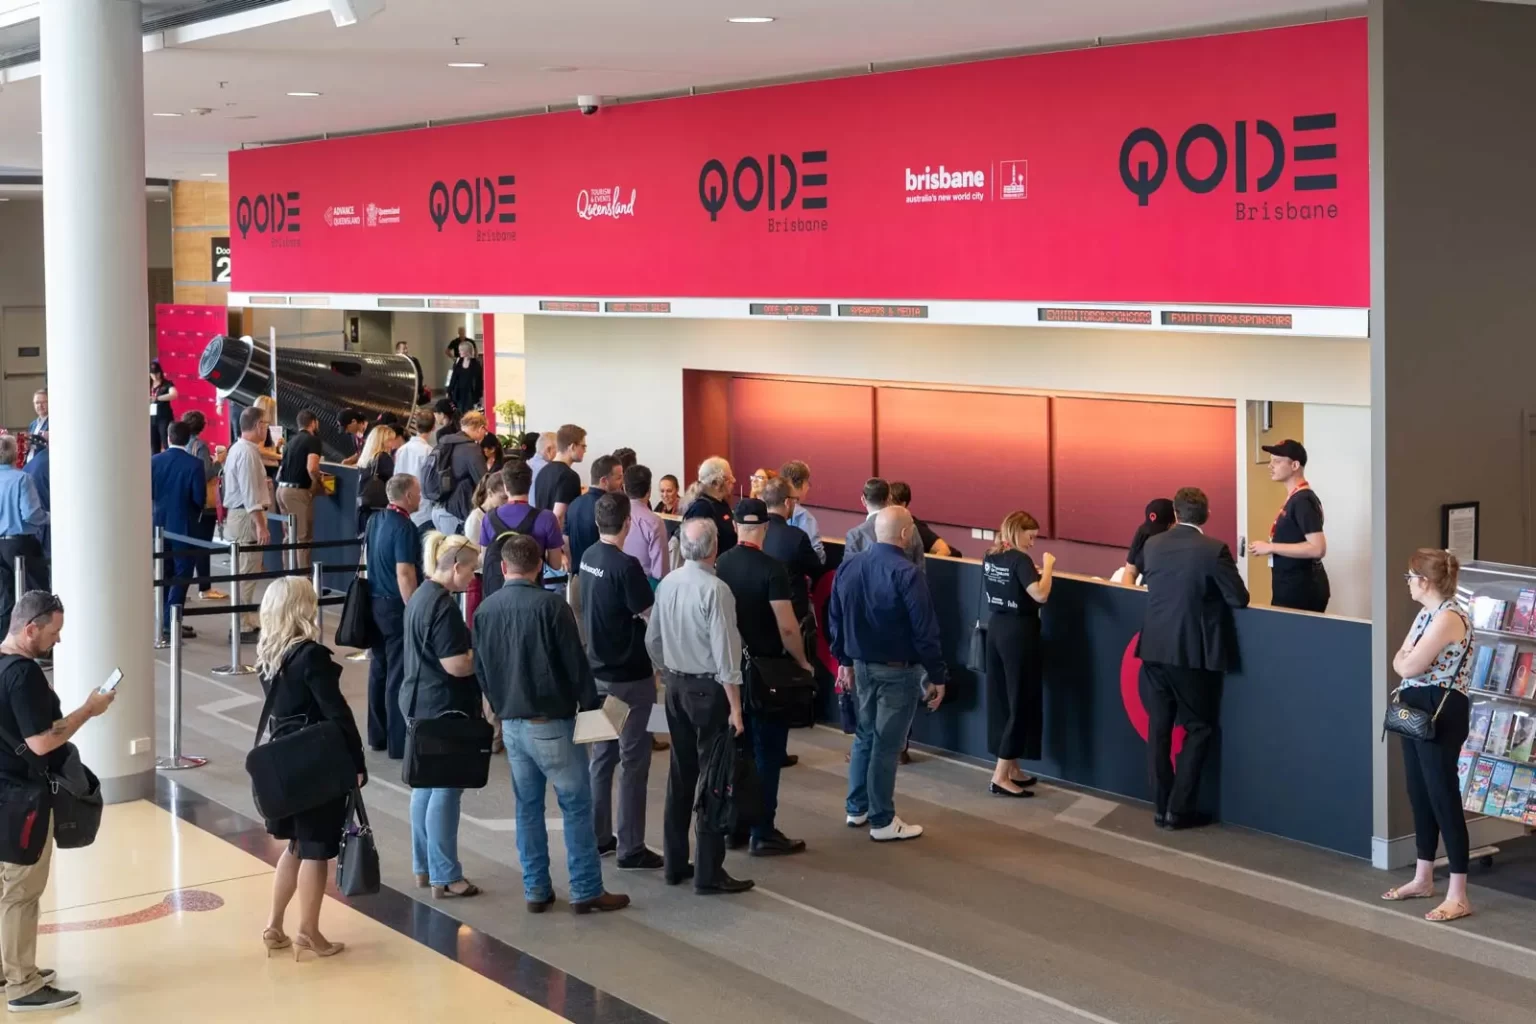 A crowd of people stands in line at a registration desk under a large red banner that reads "QODE Brisbane" in a convention center.